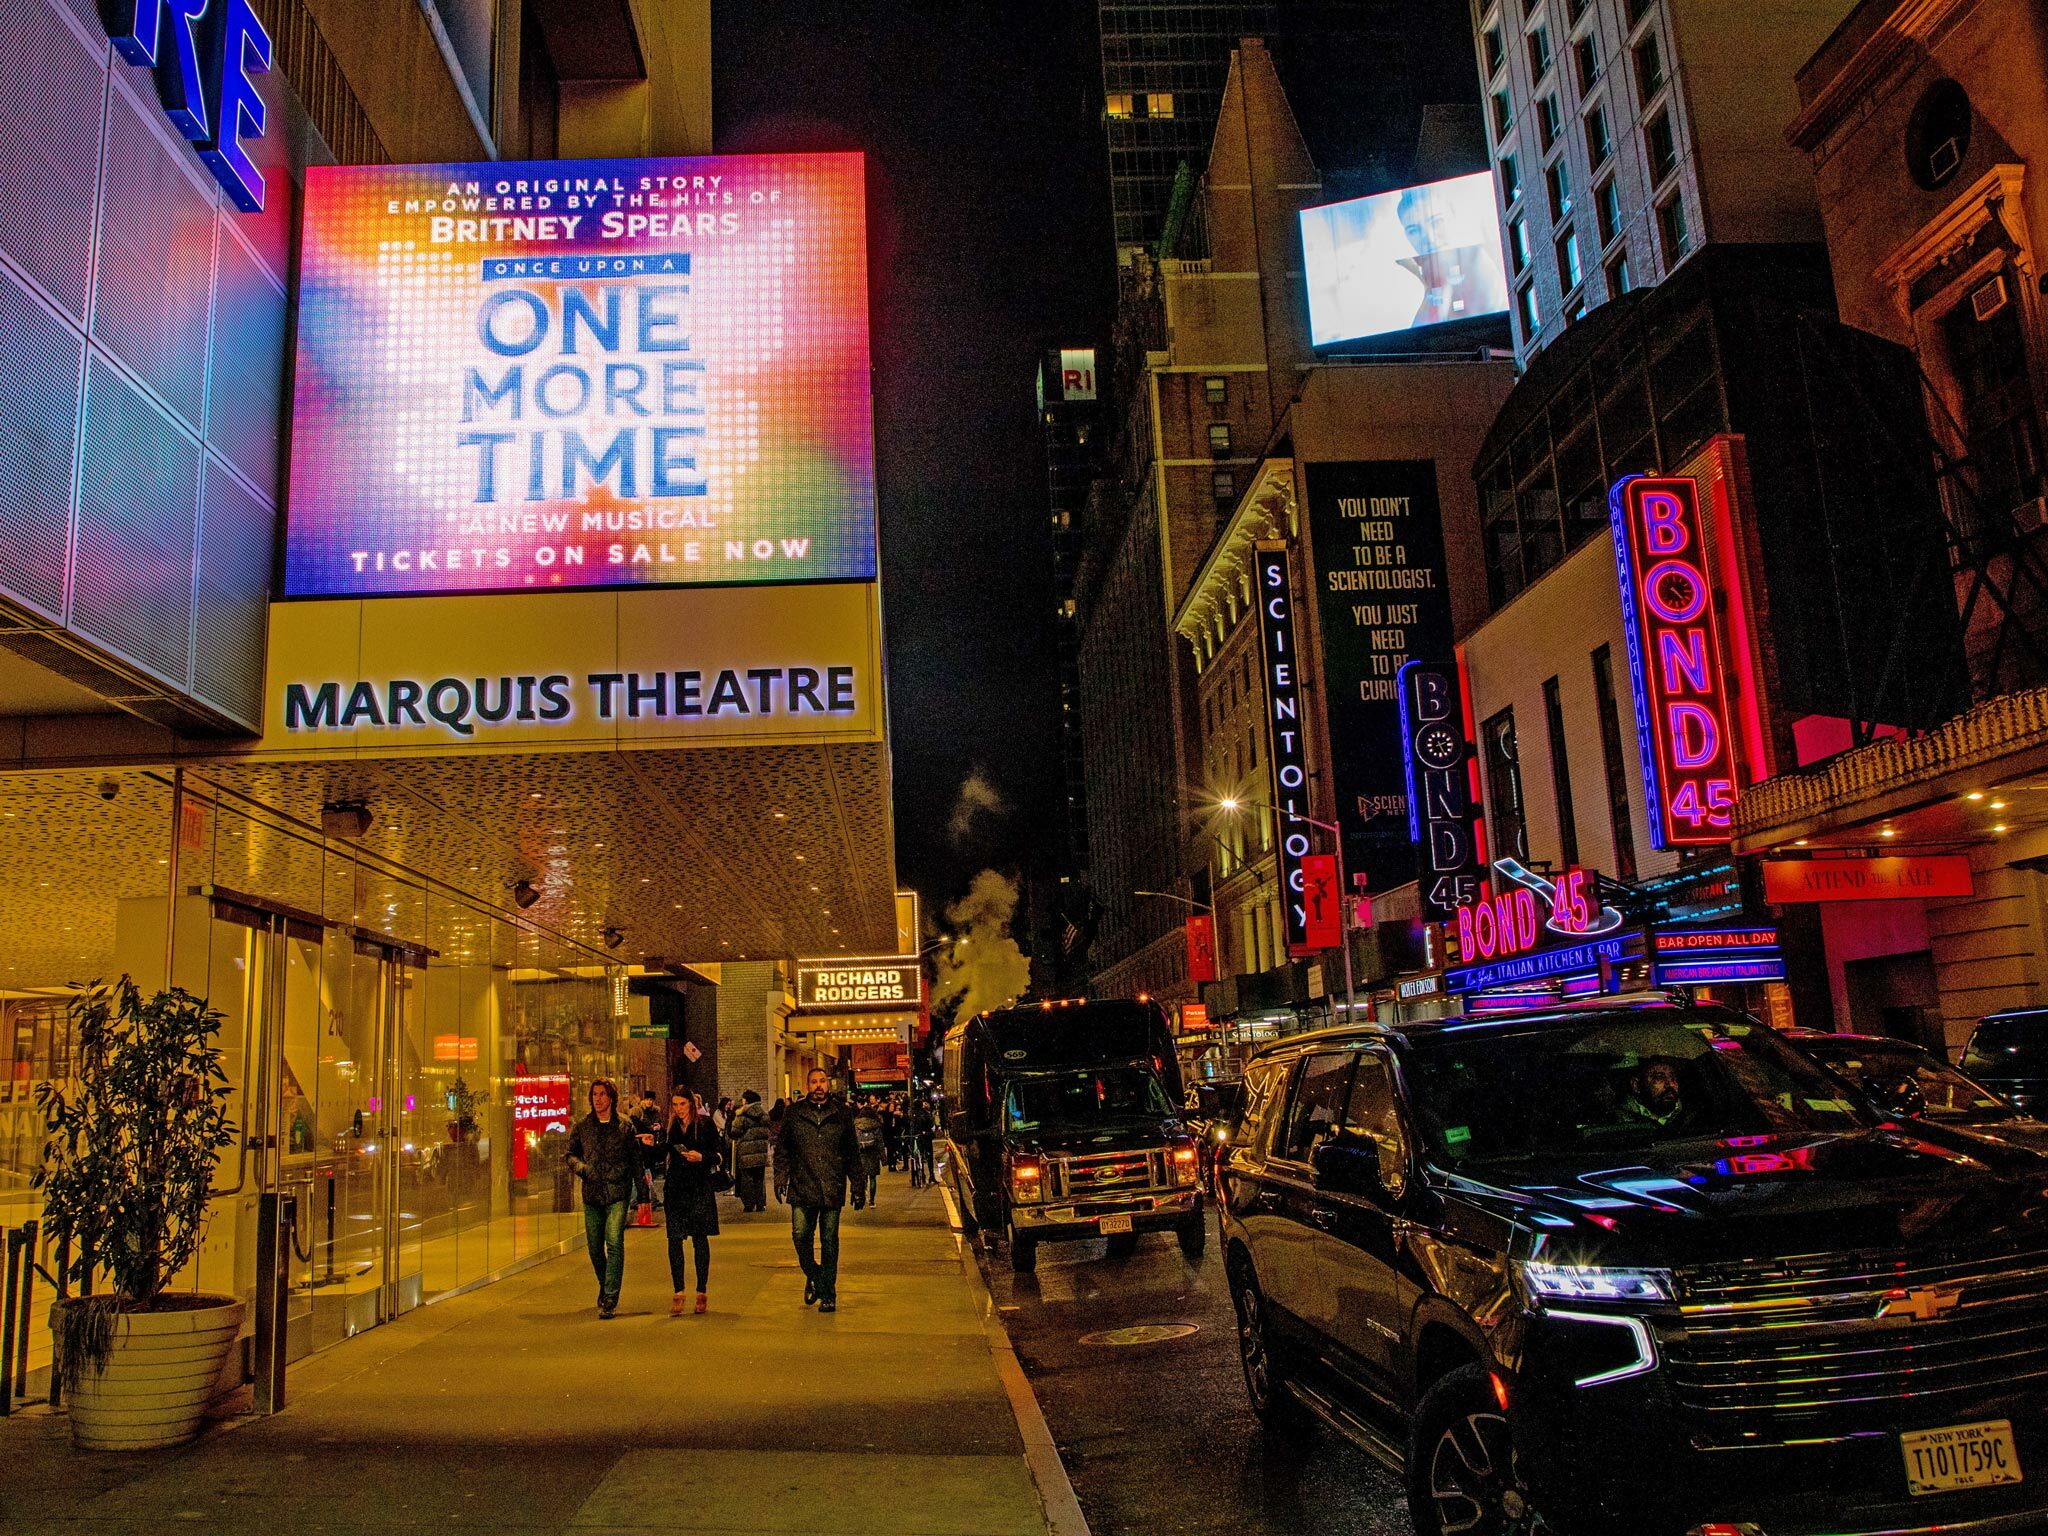 Once Upon A One More Time Marquee